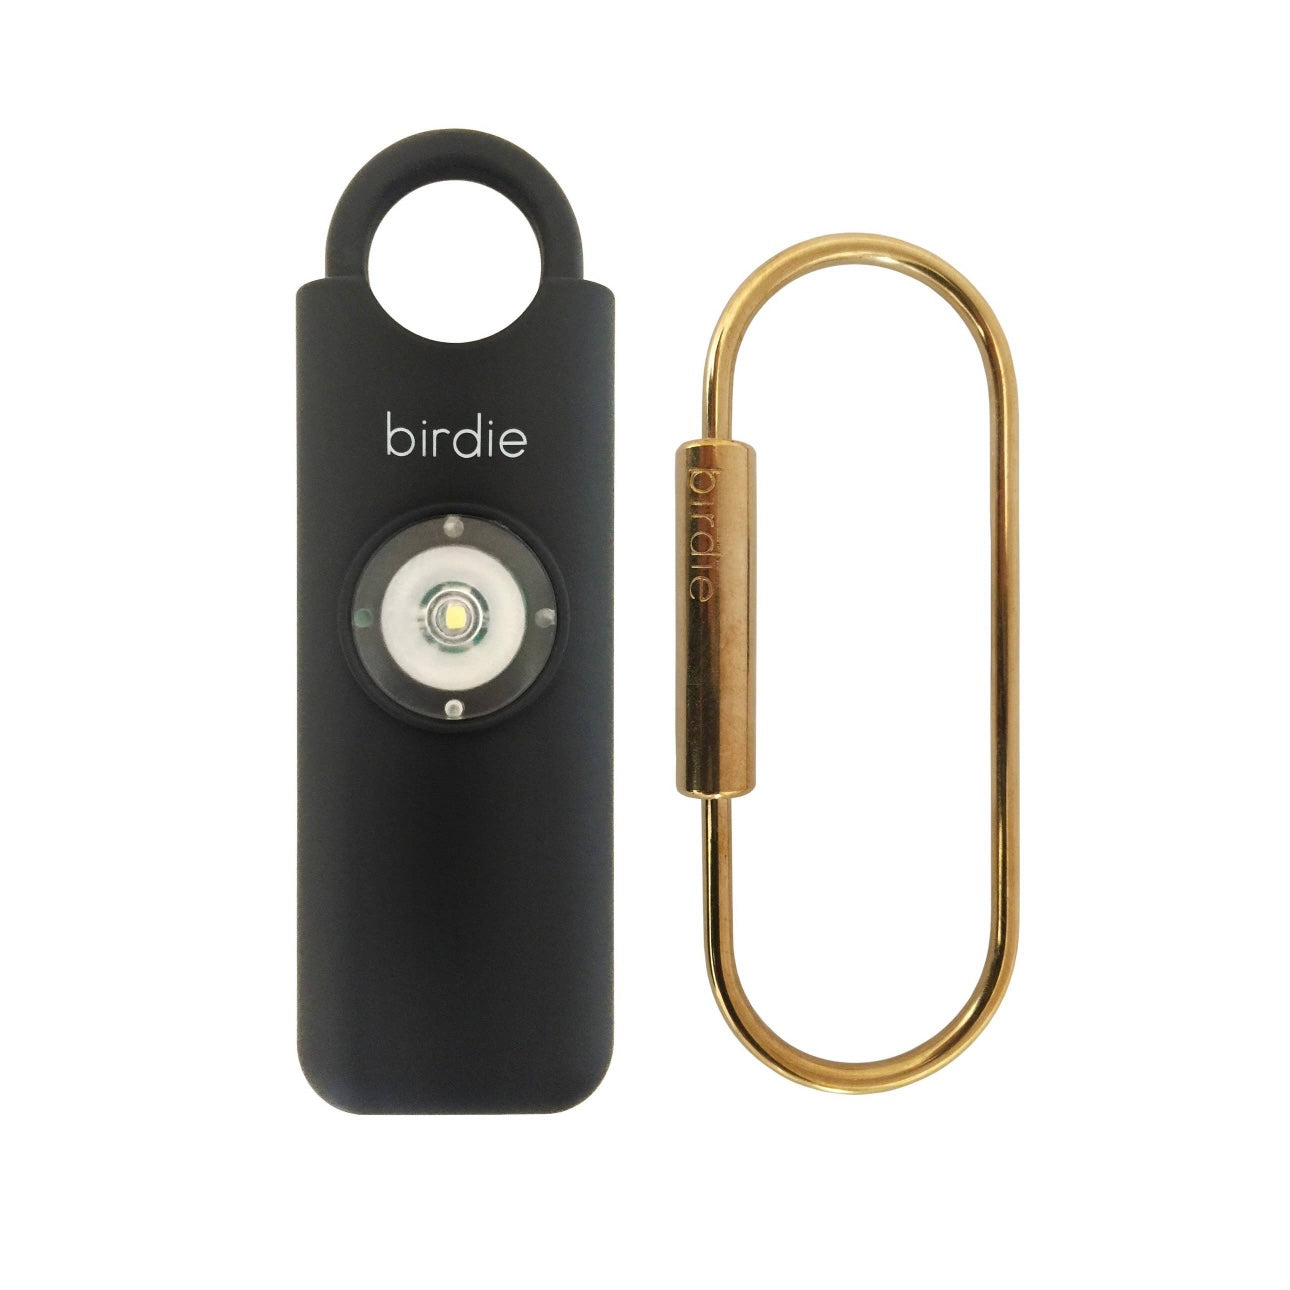 She's Birdie Personal Safety Alarm (4 Colors) - LAST ONE